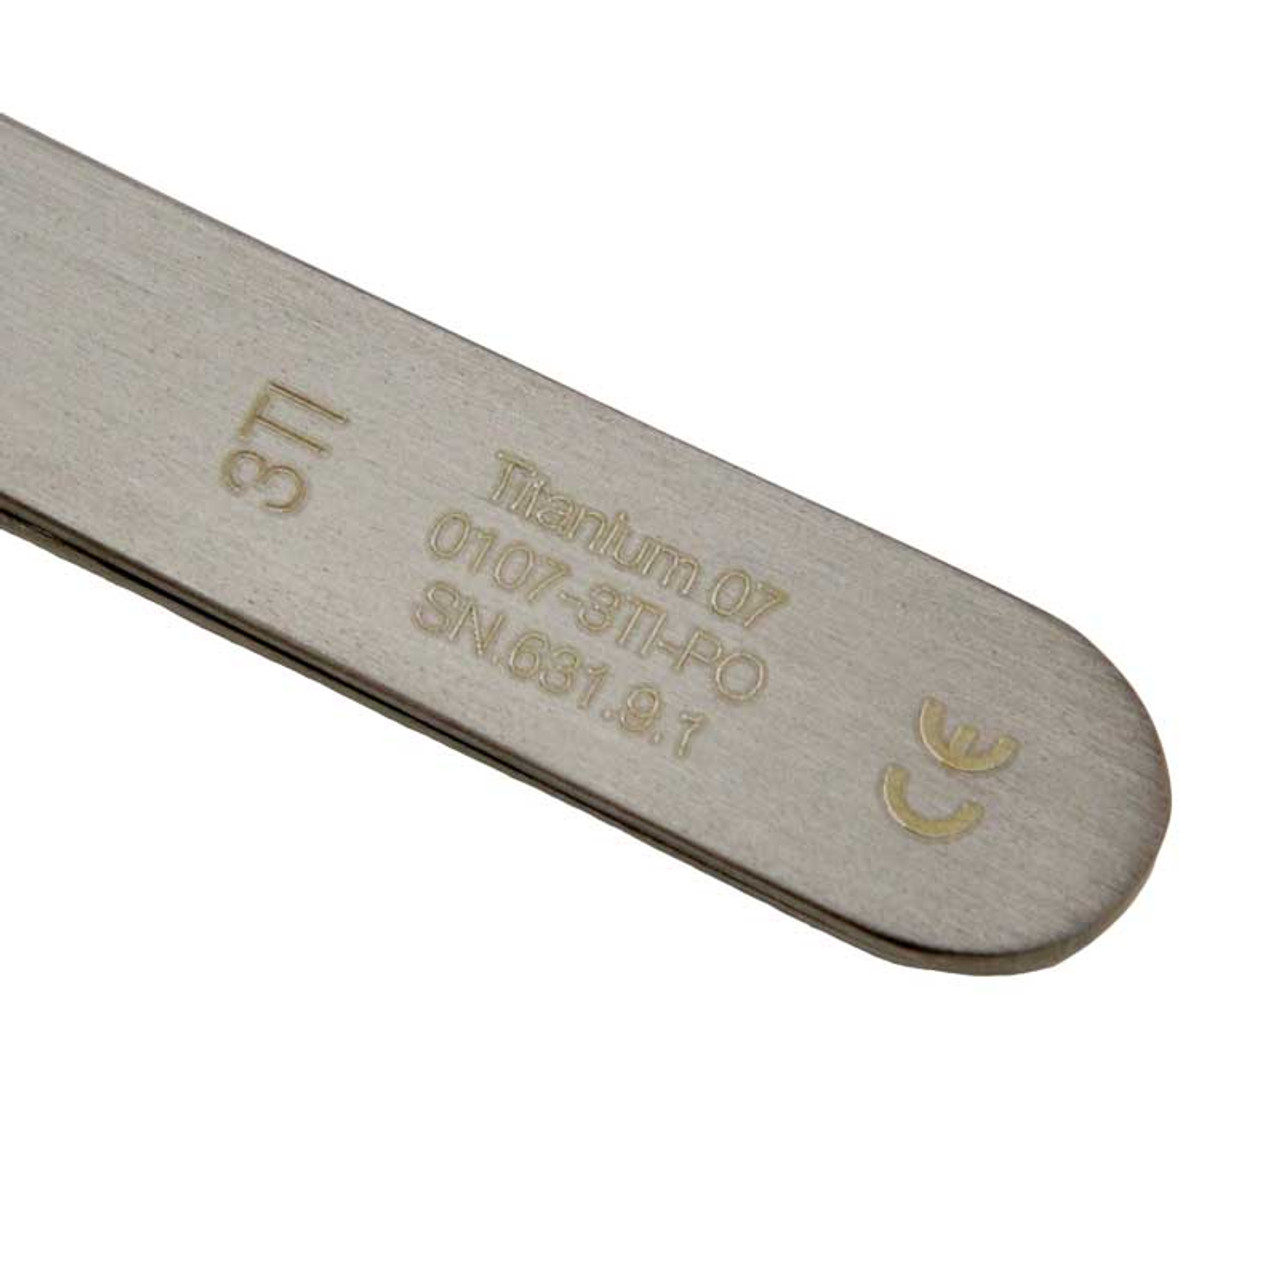 4.5 SS Anti-Magnetic Tweezer - Tapered Round Tip (2A) [19501] - $7.78 :  Legend Inc. Sparks, Nevada USA